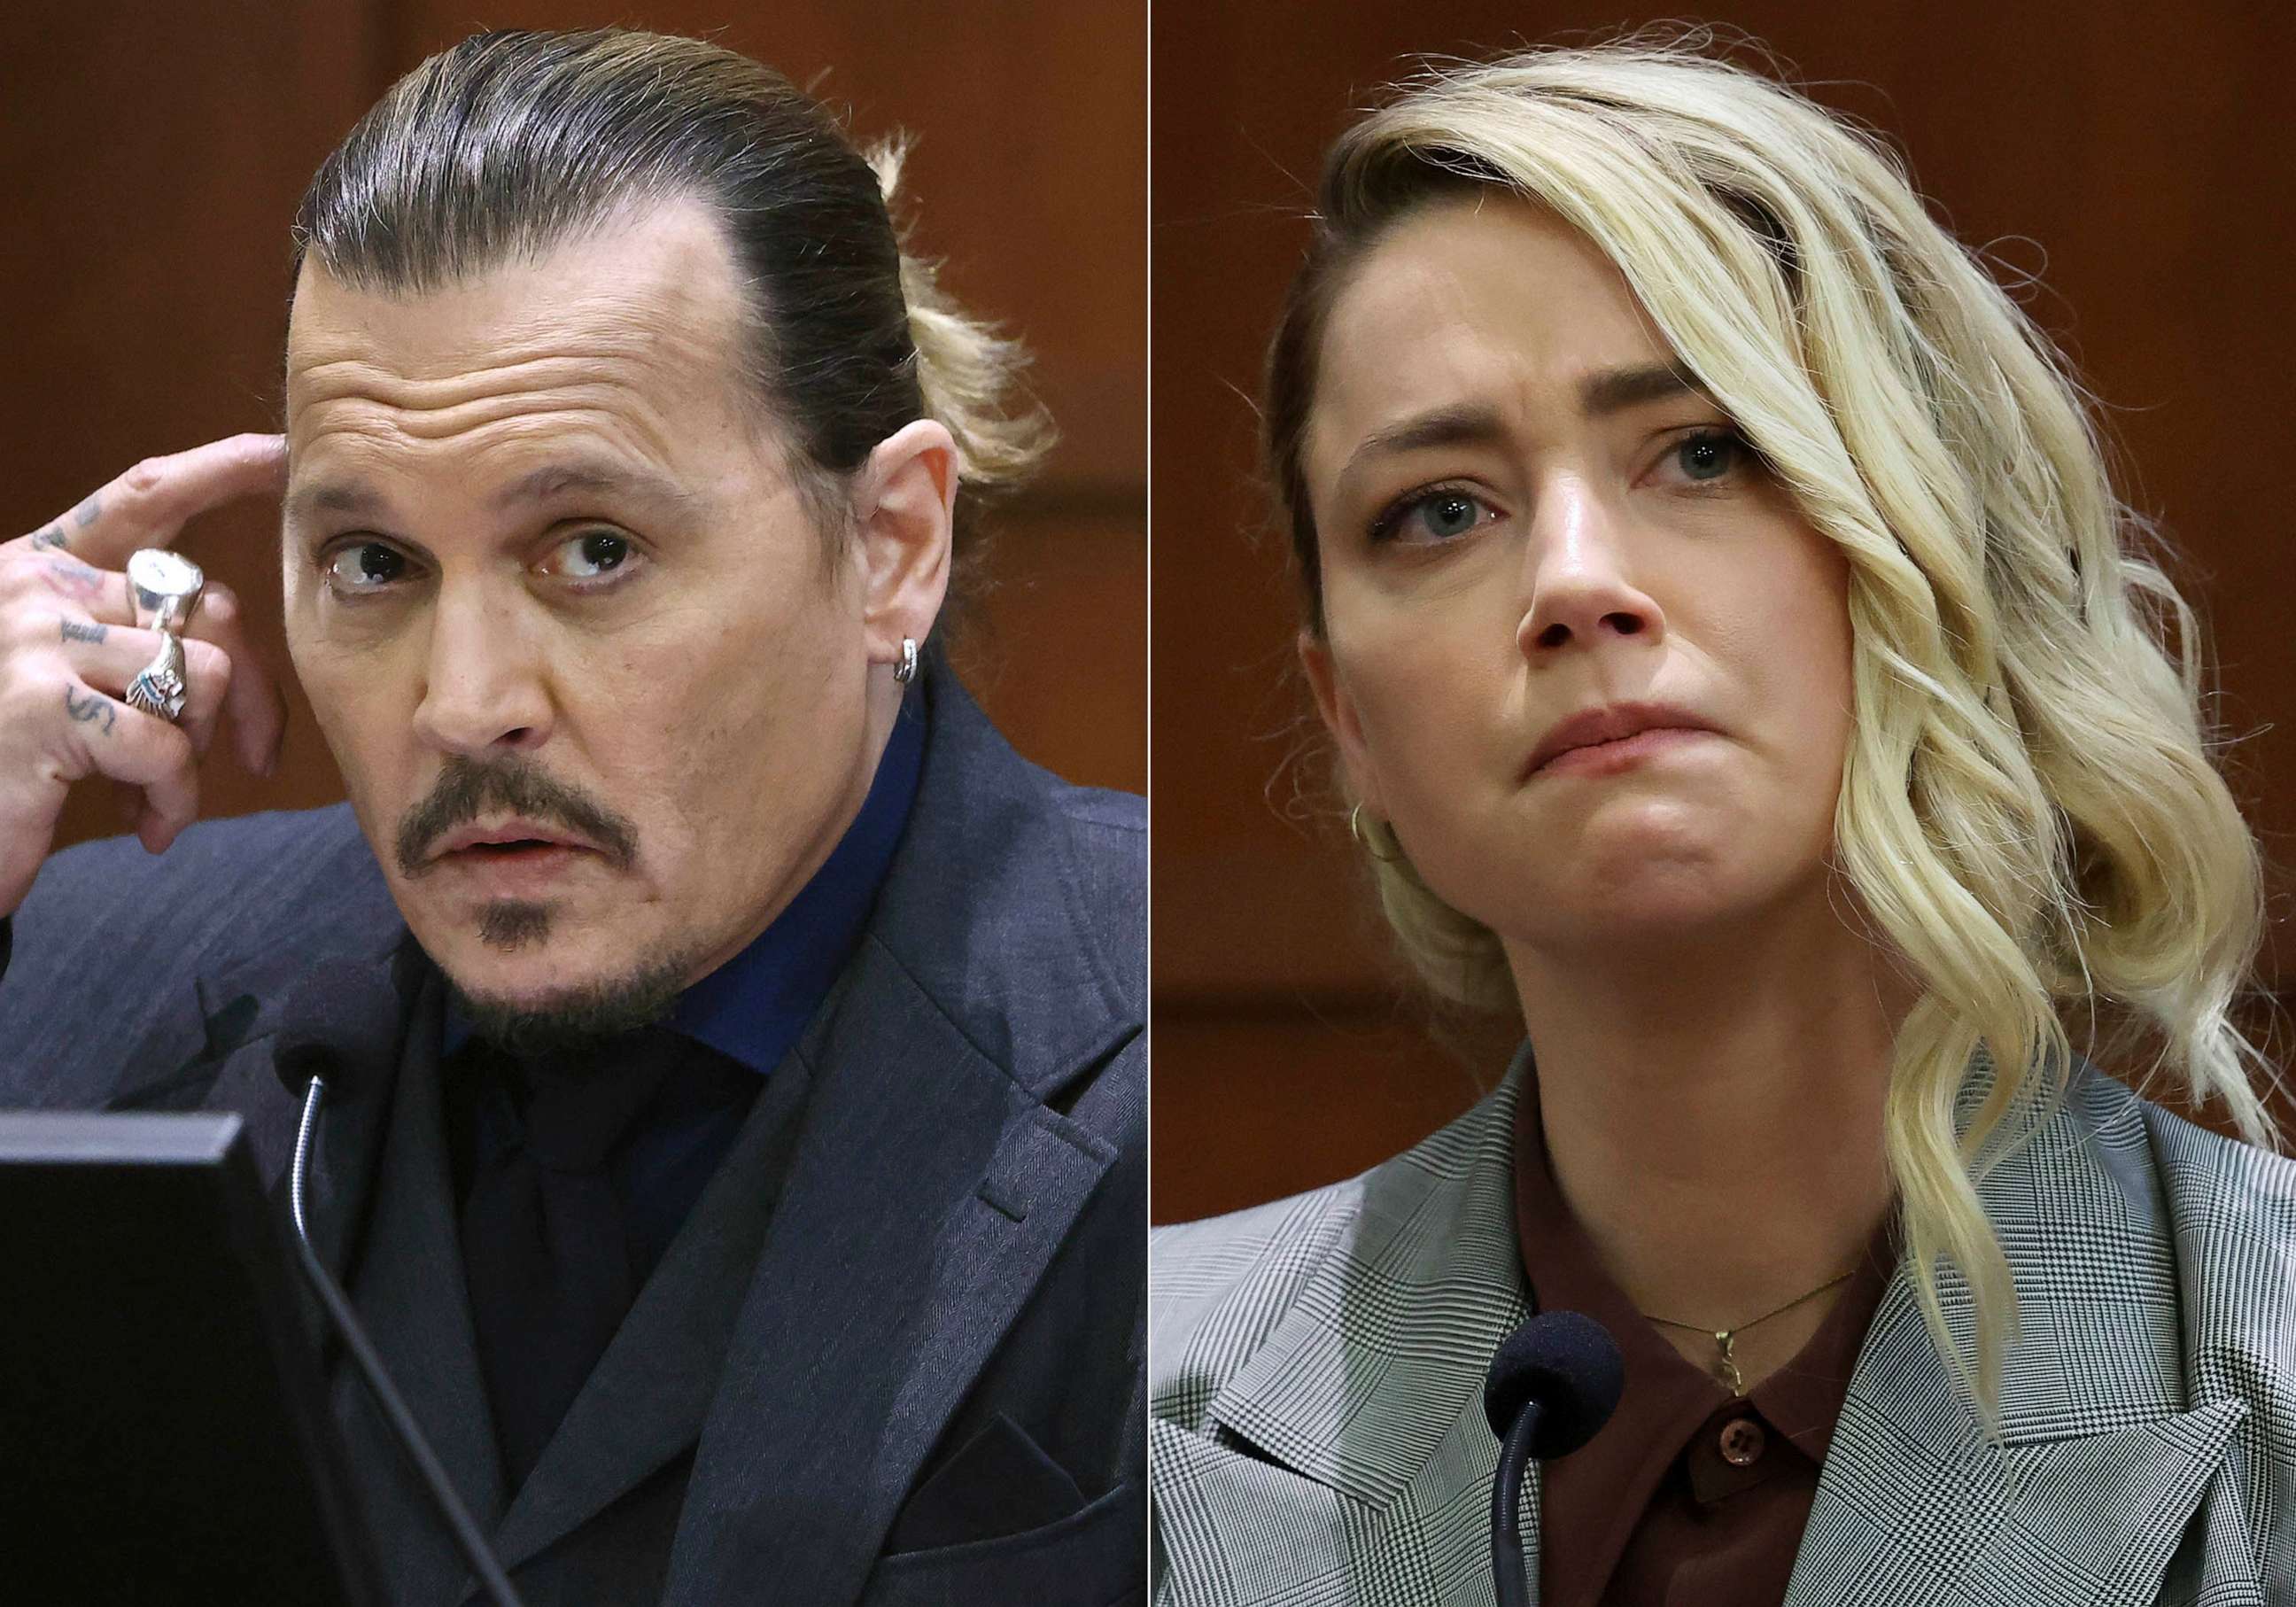 PHOTO: FILE - This combination of photos shows actor Johnny Depp testifying at the Fairfax County Circuit Court in Fairfax, Va., April 21, 2022, left, and actor Amber Heard testifying in the same courtroom, May 26, 2022.